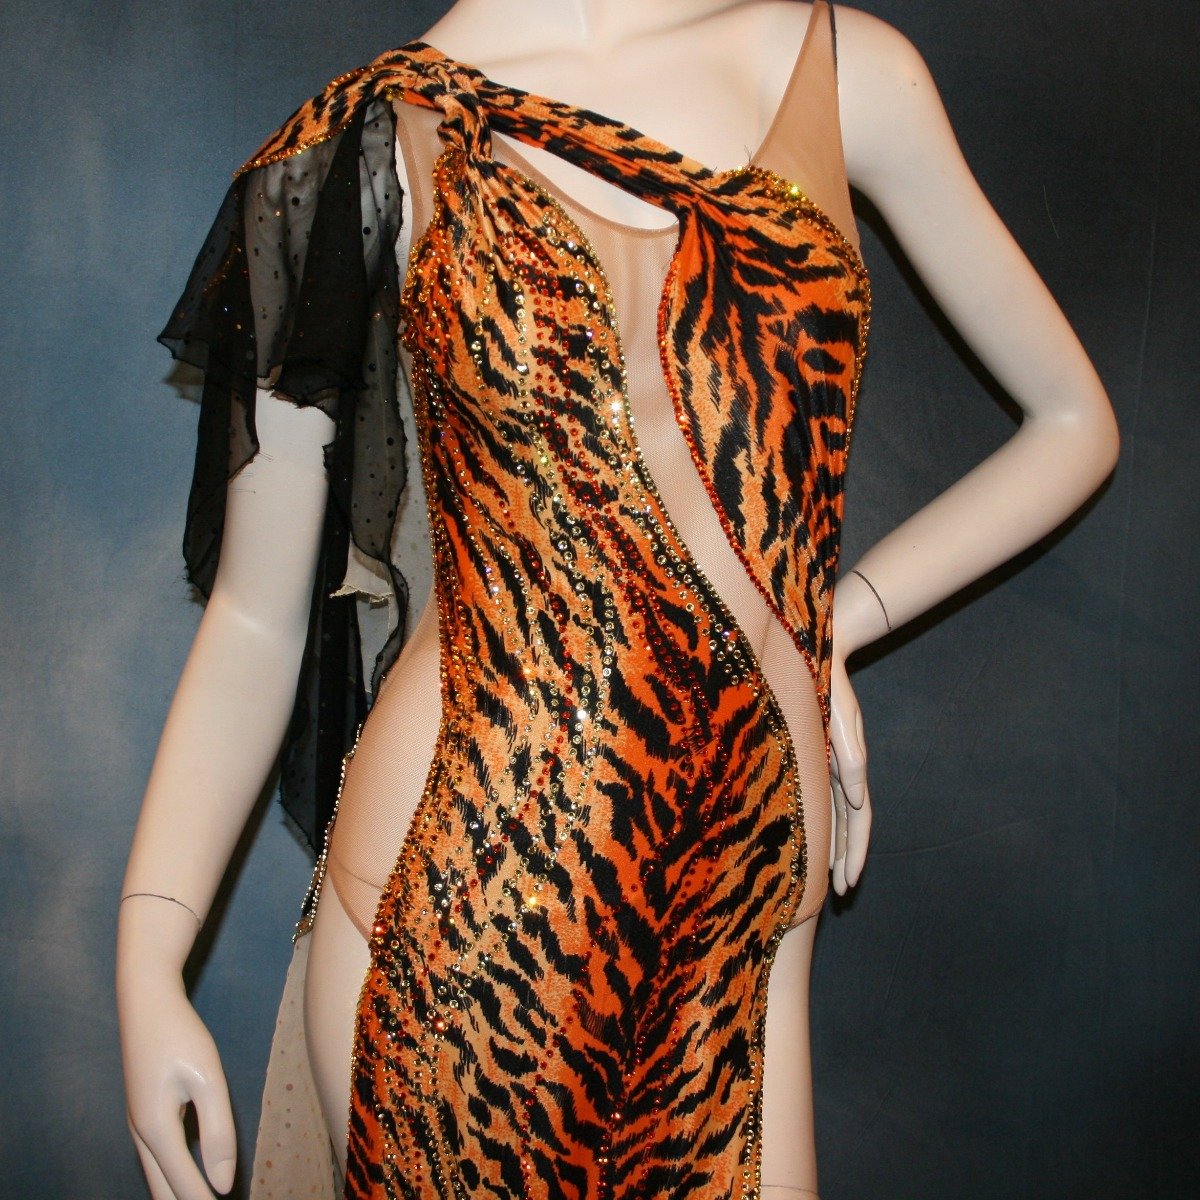 Crystal's Creations close up view of orange & black tiger print Latin/rhythm dress with pale yellow accents